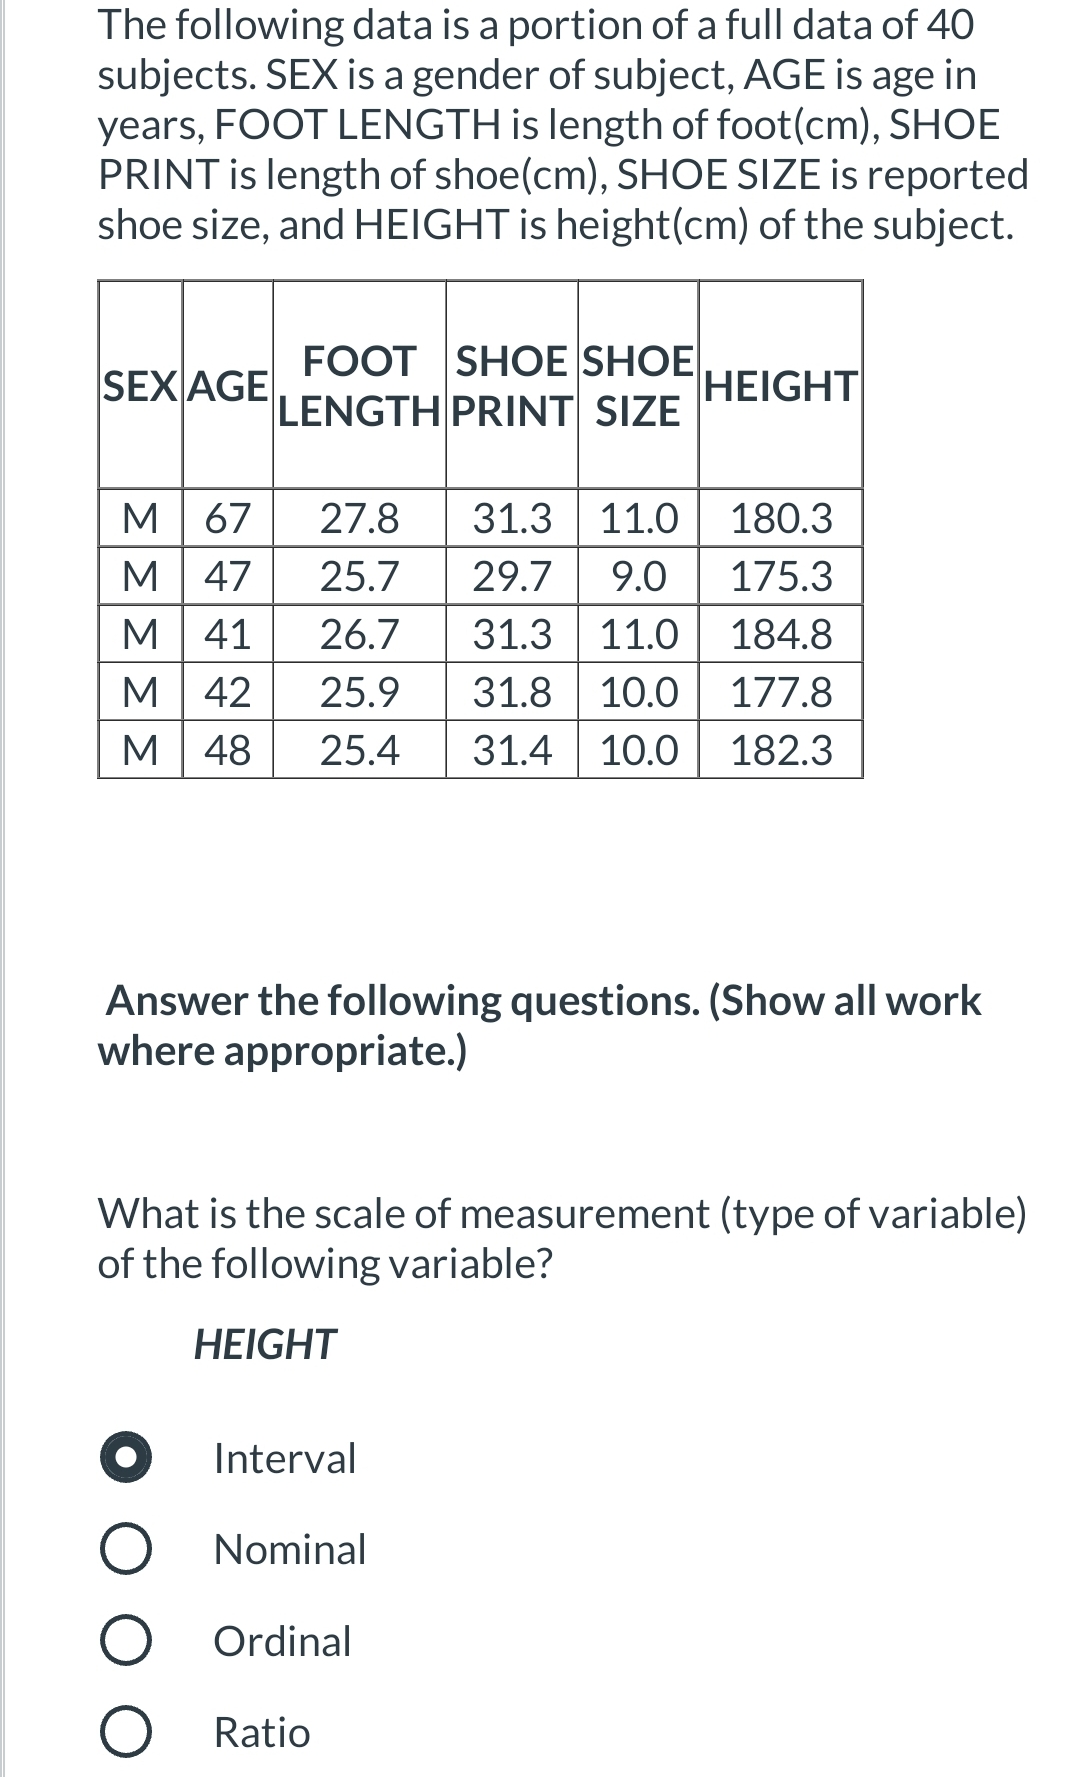 The following data is a portion of a full data of 40
subjects. SEX is a gender of subject, AGE is age in
years, FOOT LENGTH is length of foot(cm), SHOE
PRINT is length of shoe(cm), SHOE SIZE is reported
shoe size, and HEIGHT is height(cm) of the subject.
FOOT SHOE SHOE
LENGTH PRINT SIZE
SEX AGE
HEIGHT
31.3 11.0
М 67
М 47
М 41
М 42
27.8
180.3
25.7
29.7
9.0
175.3
31.3 11.0
31.8 10.0
31.4 10.0
26.7
184.8
25.9
177.8
М 48
25.4
182.3
Answer the following questions. (Show all work
where appropriate.)
What is the scale of measurement (type of variable)
of the following variable?
НEIGHT
O Interval
O Nominal
O Ordinal
O Ratio
